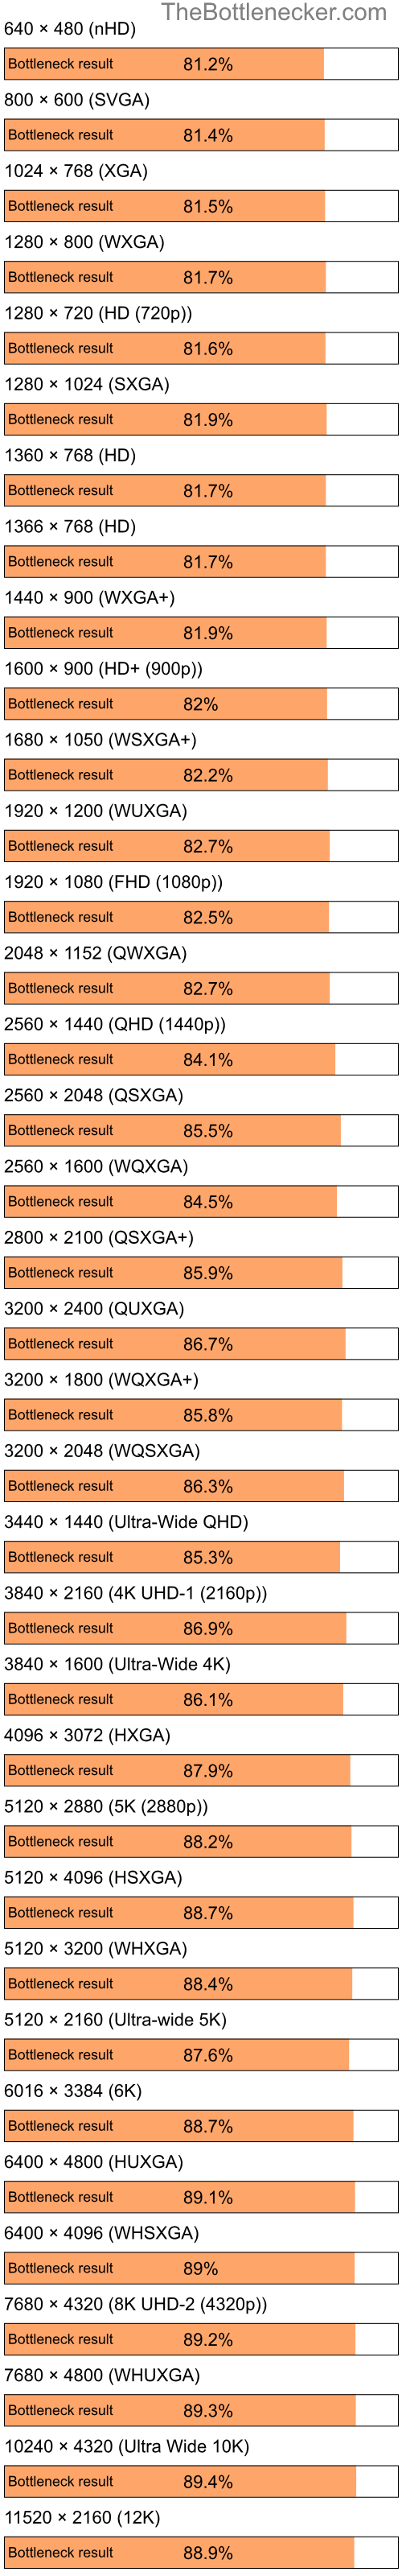 Bottleneck results by resolution for Intel Atom Z520 and NVIDIA GeForce 7050 in Graphic Card Intense Tasks